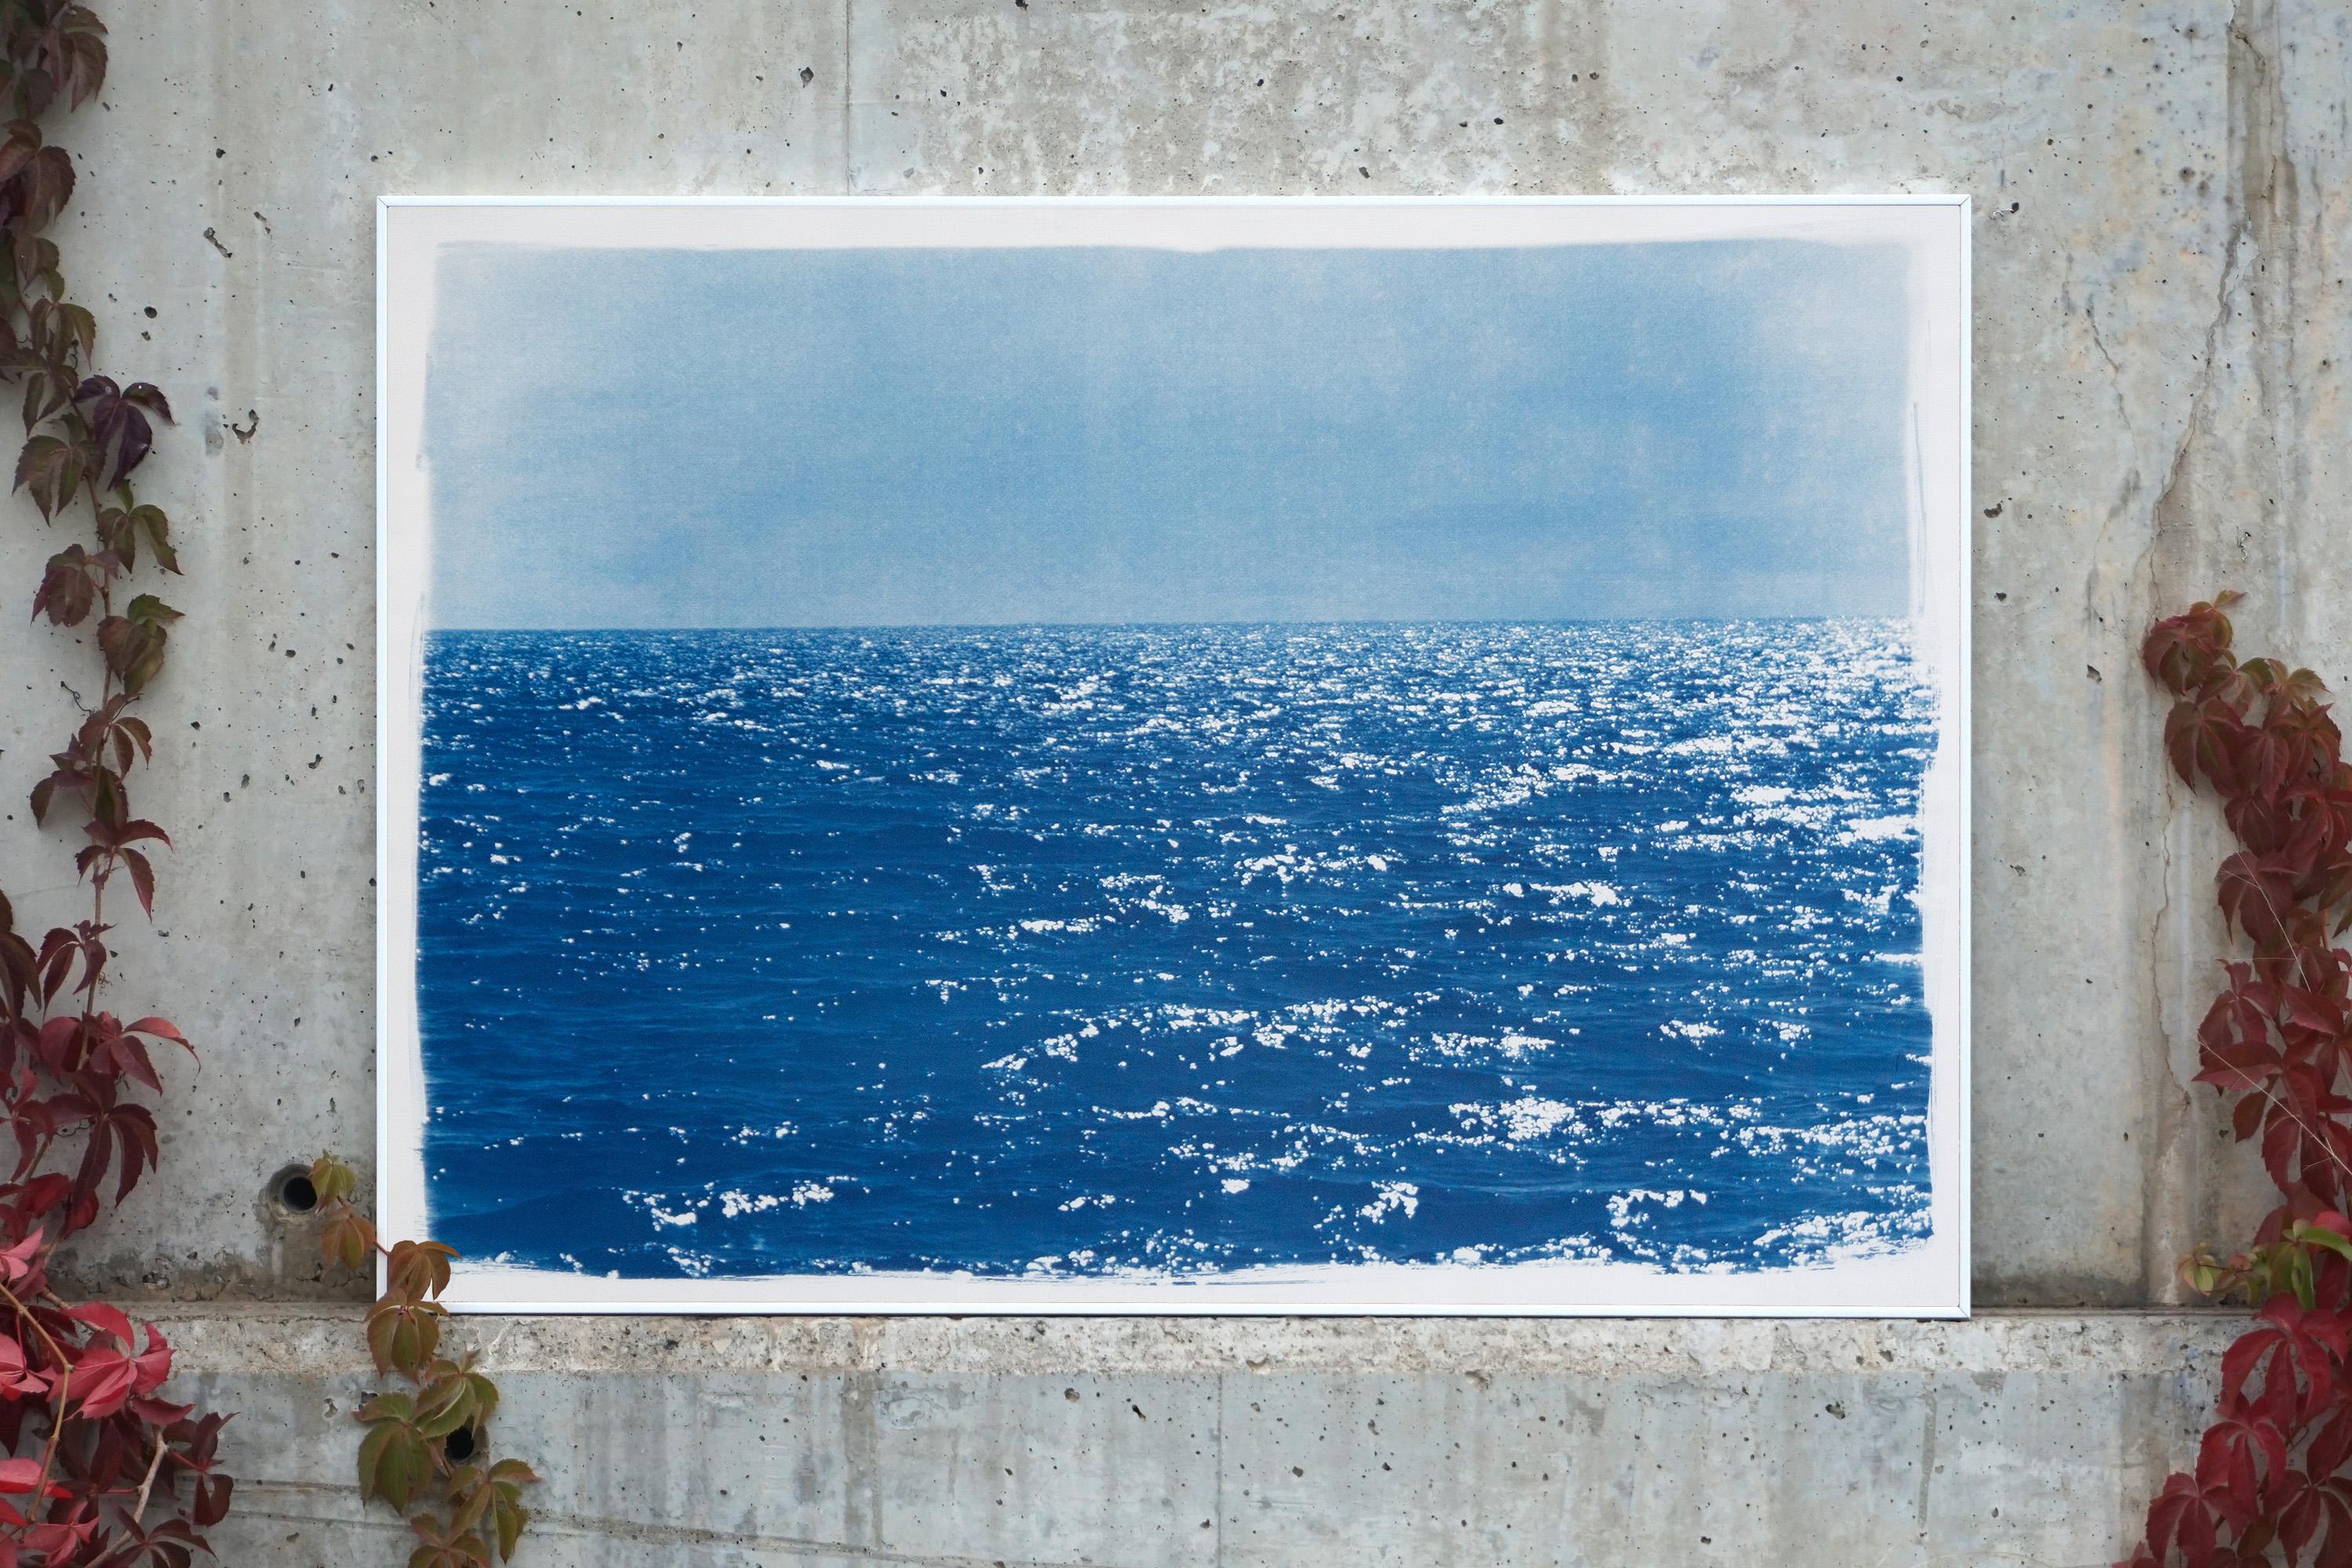 Coastal Blue Cyanotype of Day Time Seascape, Cold Waves, Nautical Painting Shore - Contemporary Art by Kind of Cyan